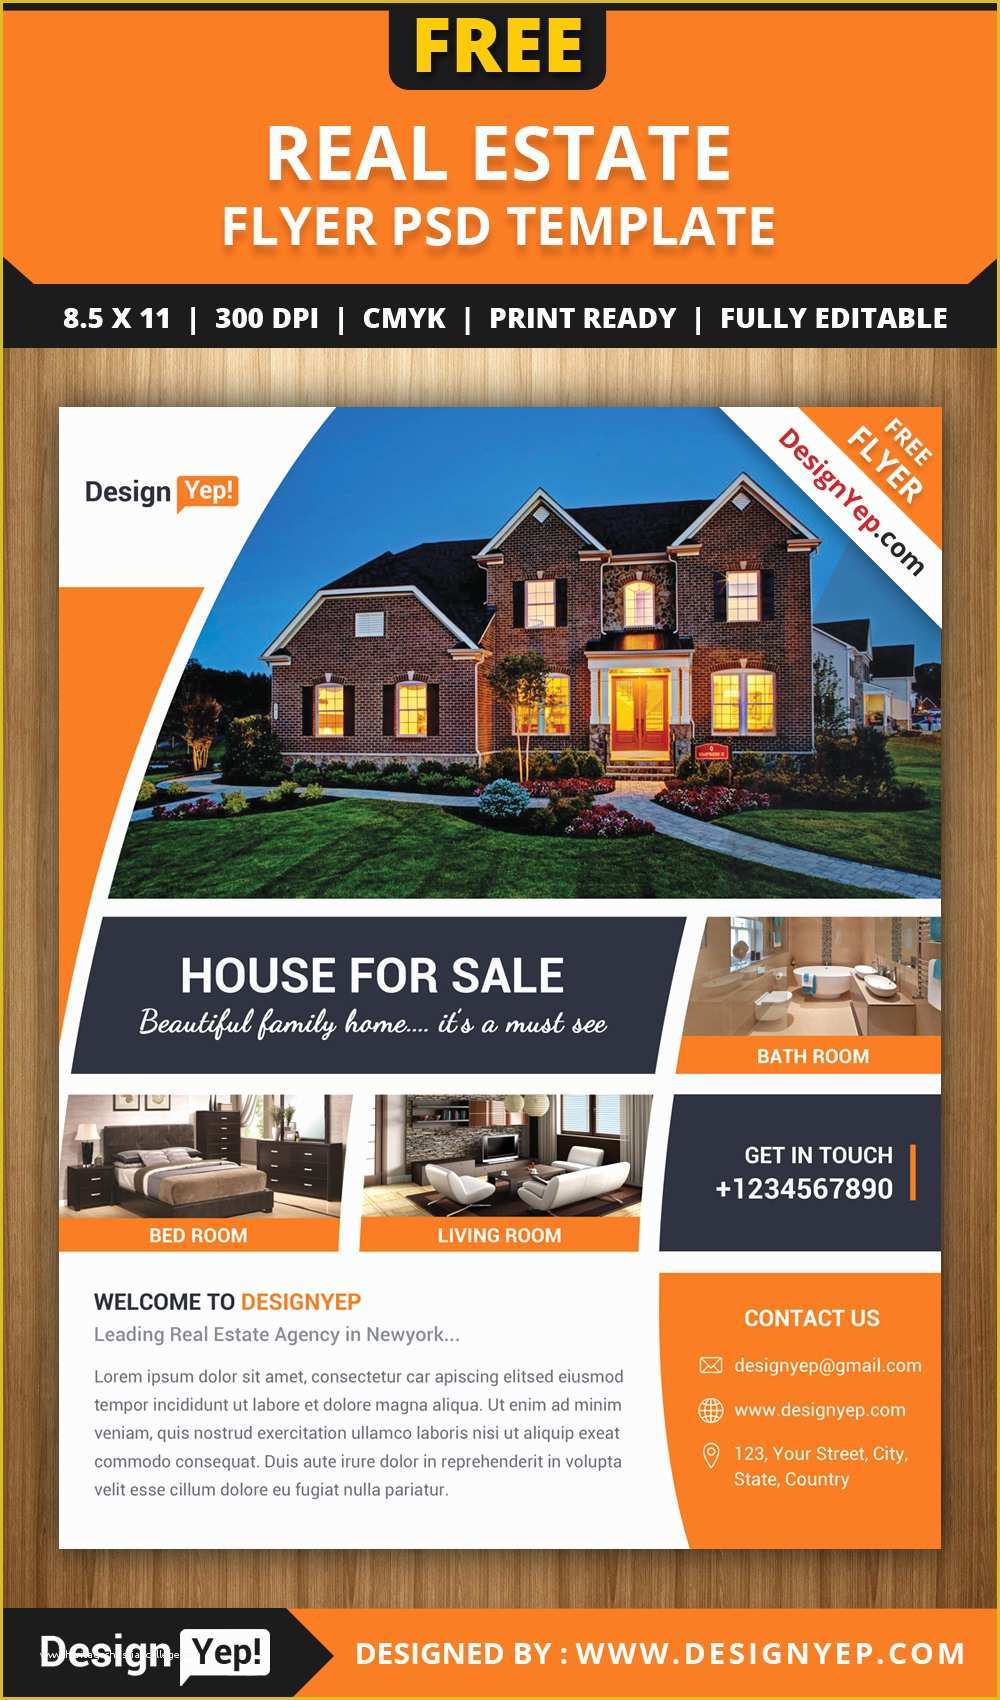 Remodeling Flyer Templates Free Of Free Real Estate Flyer Psd Template Designyep